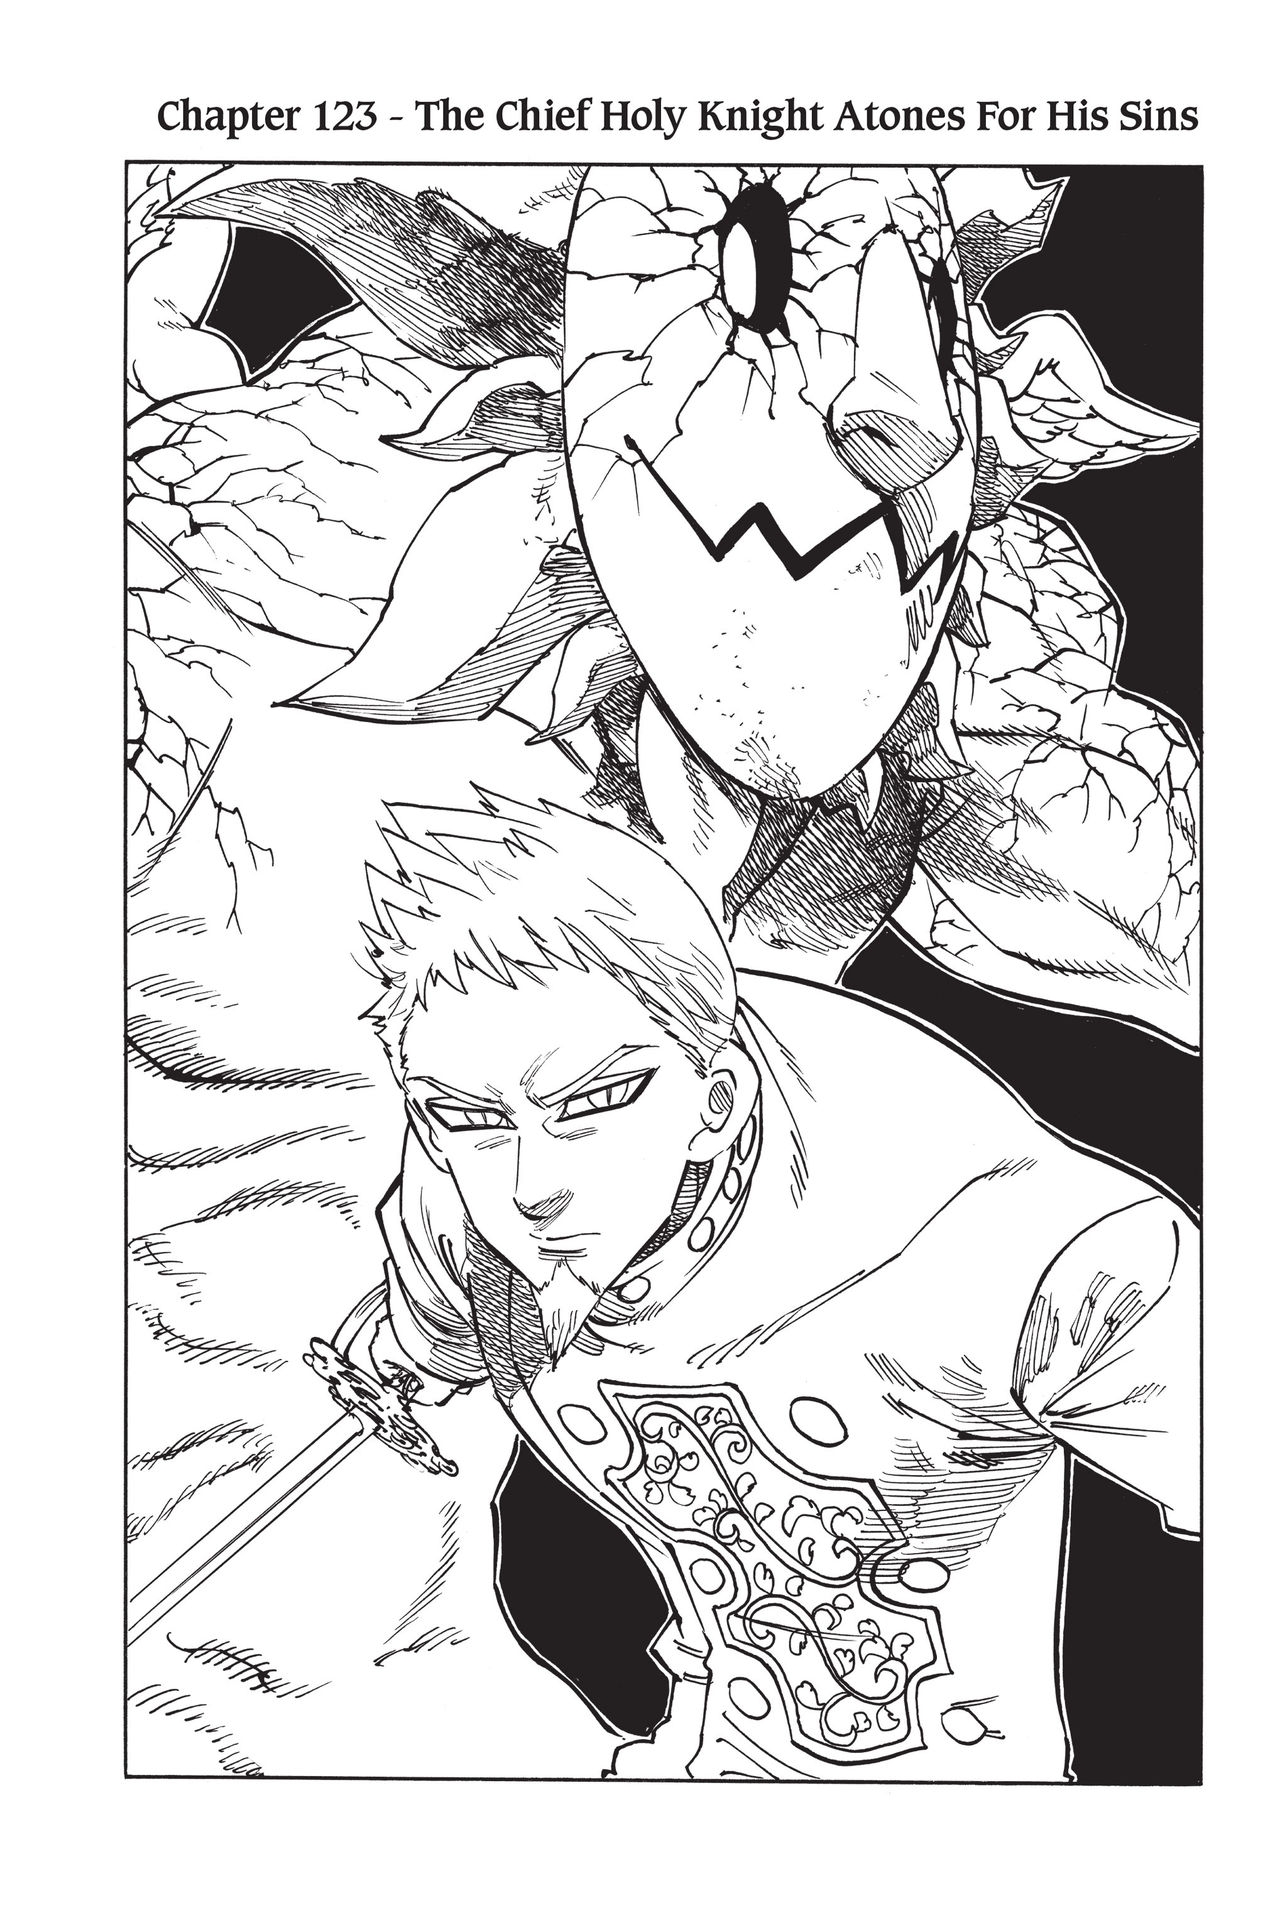 The Seven Deadly Sins (Covers & Chapter Title Cards) 322